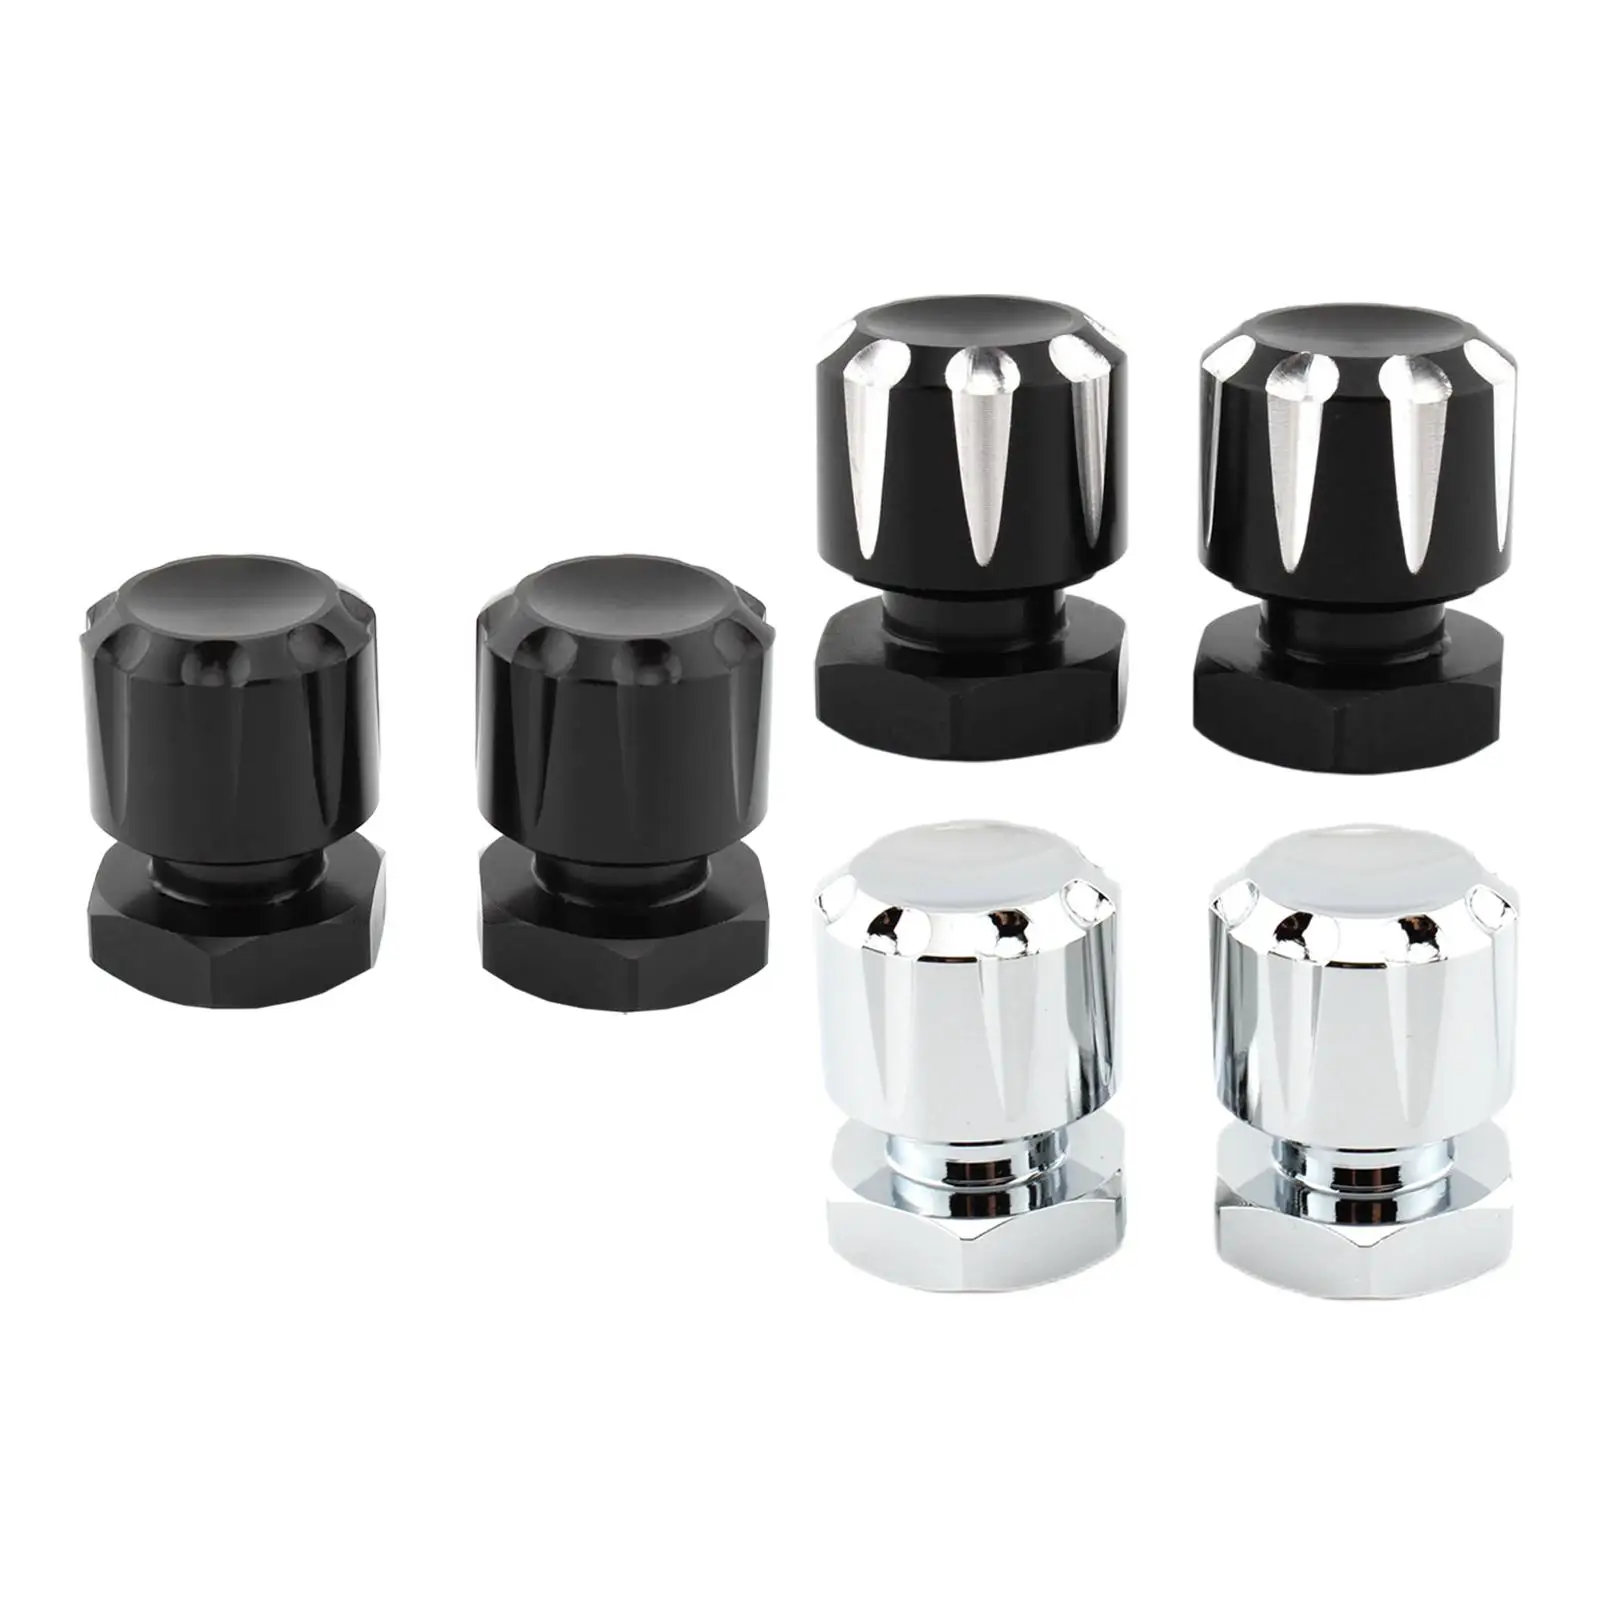 Solo Mounting Nuts Bolts Direct Replaces Spare Parts 78032 Seat Mounting Bolts Solo Mounting Nuts for Breakout 114 Fxbrs